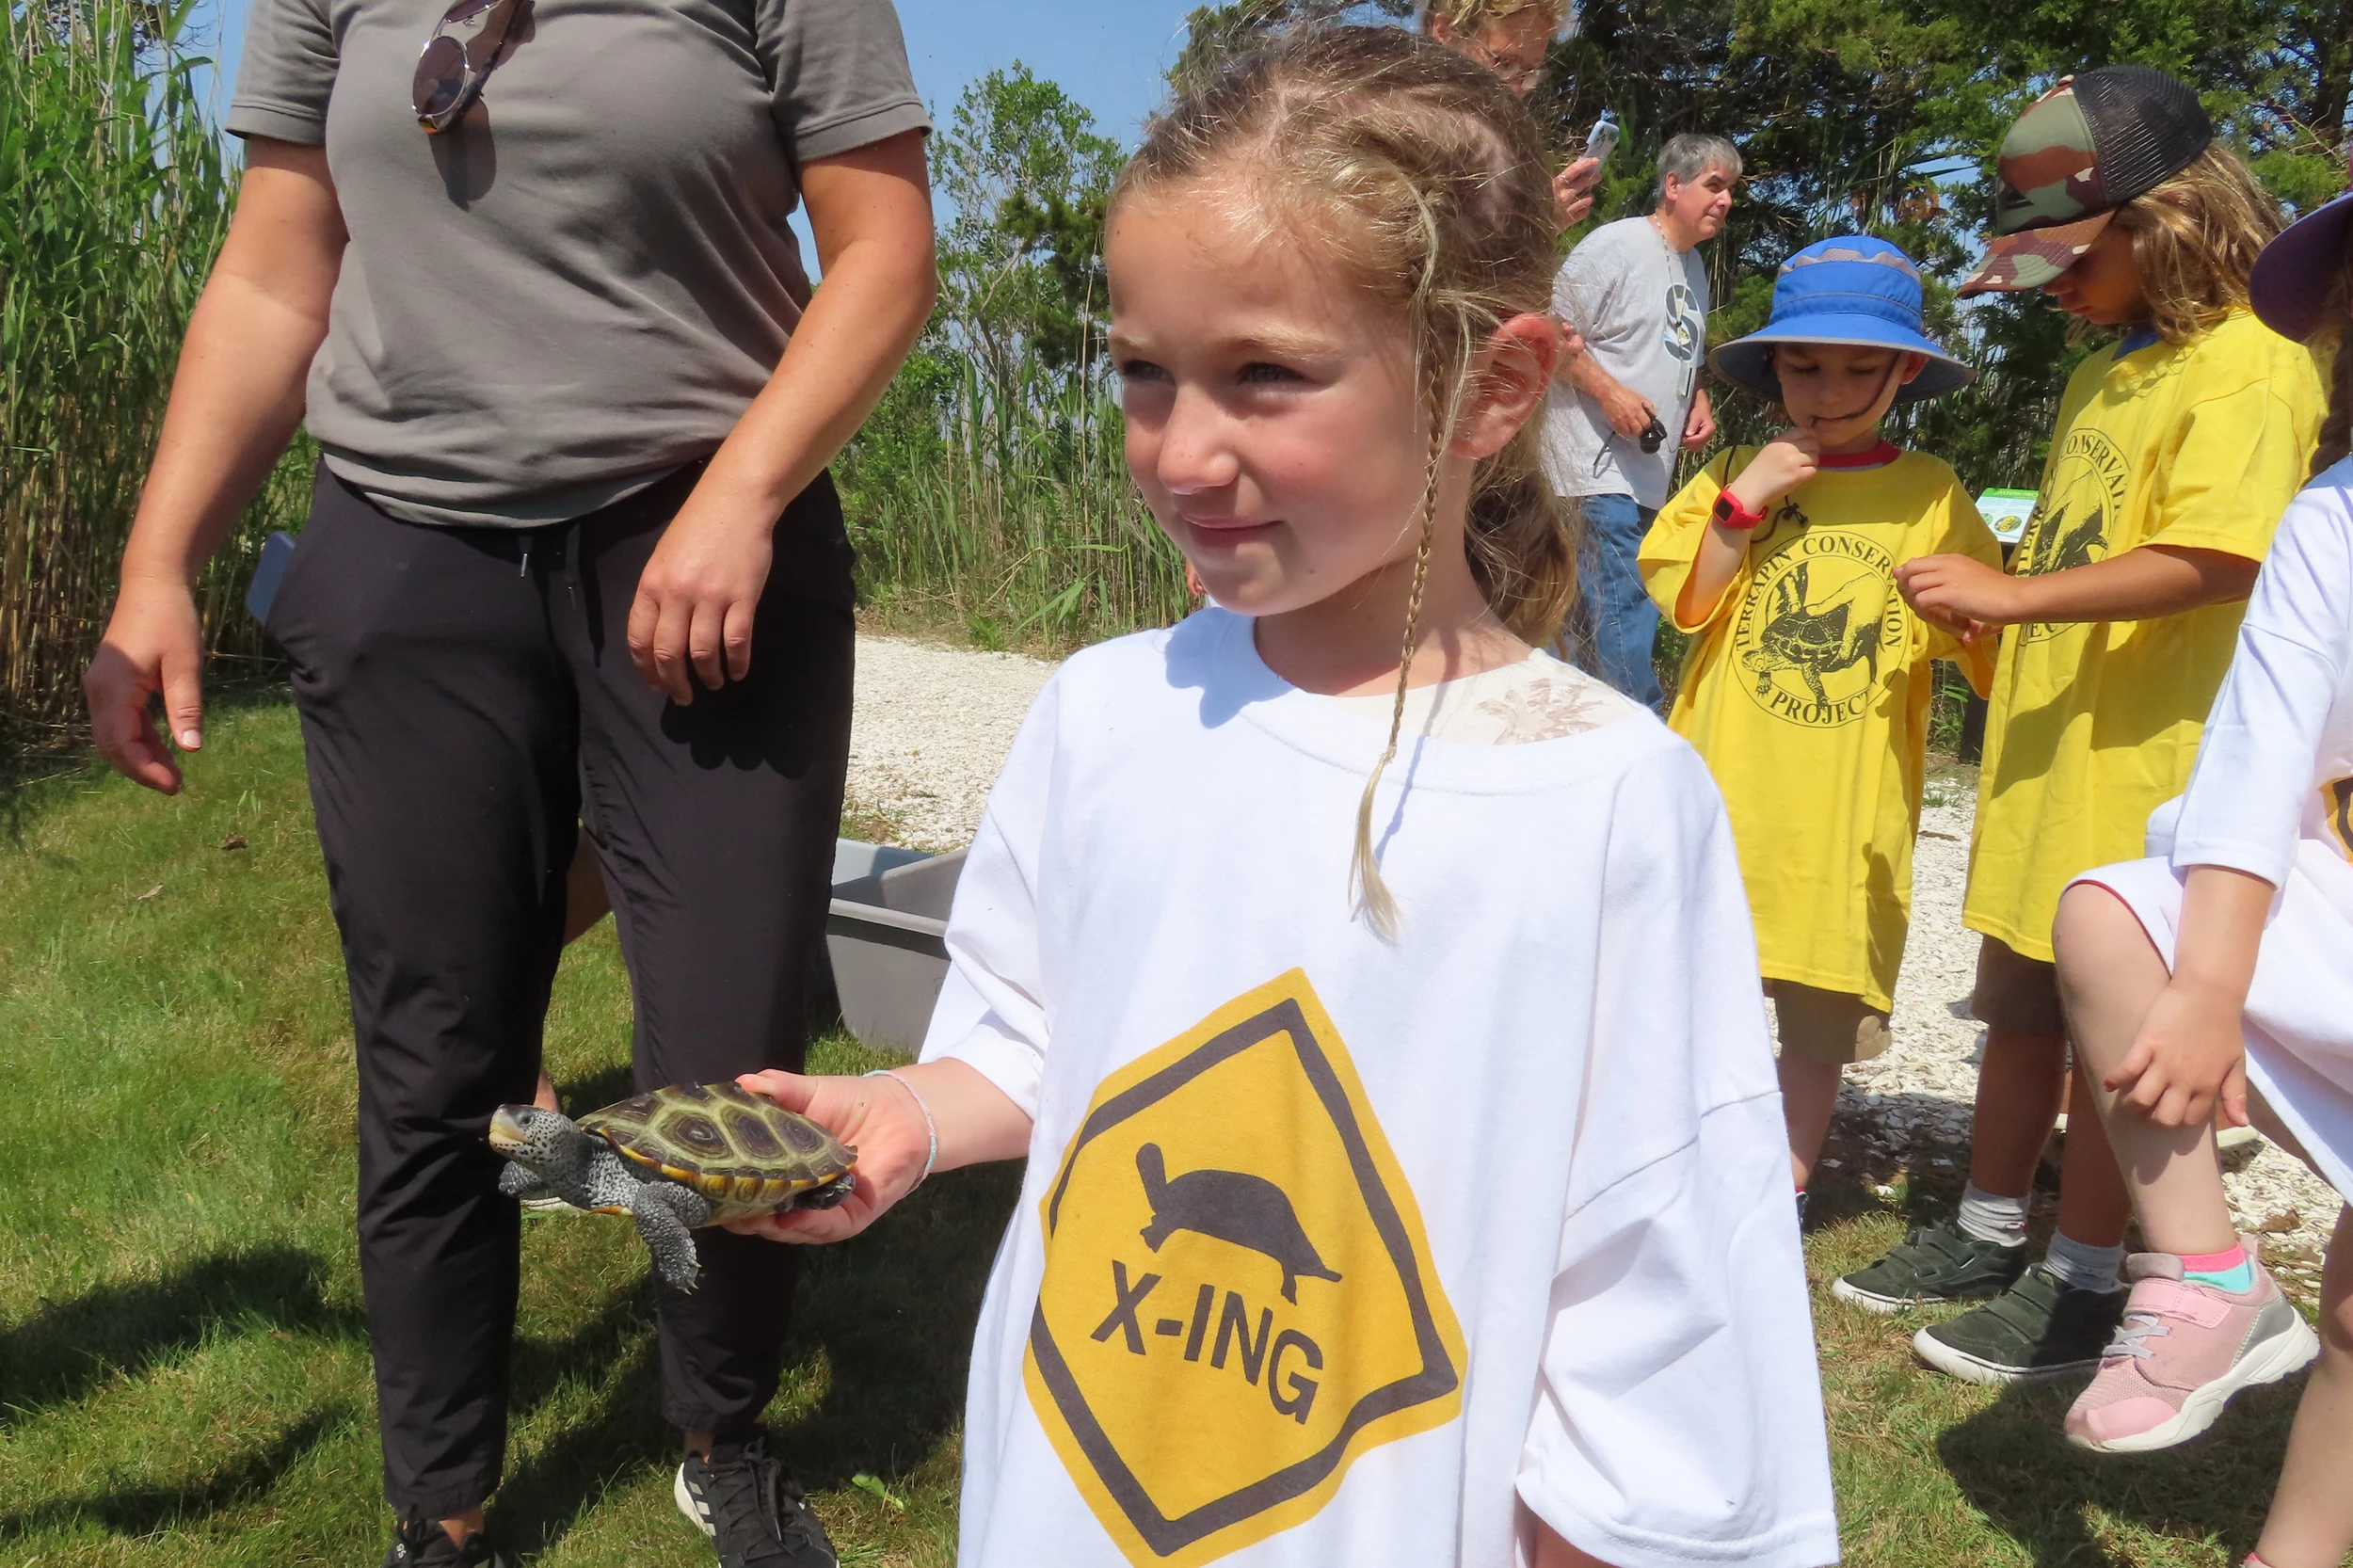 Orphaned turtles and the Stone Harbor, NJ kids who set them free at
the Jersey Shore